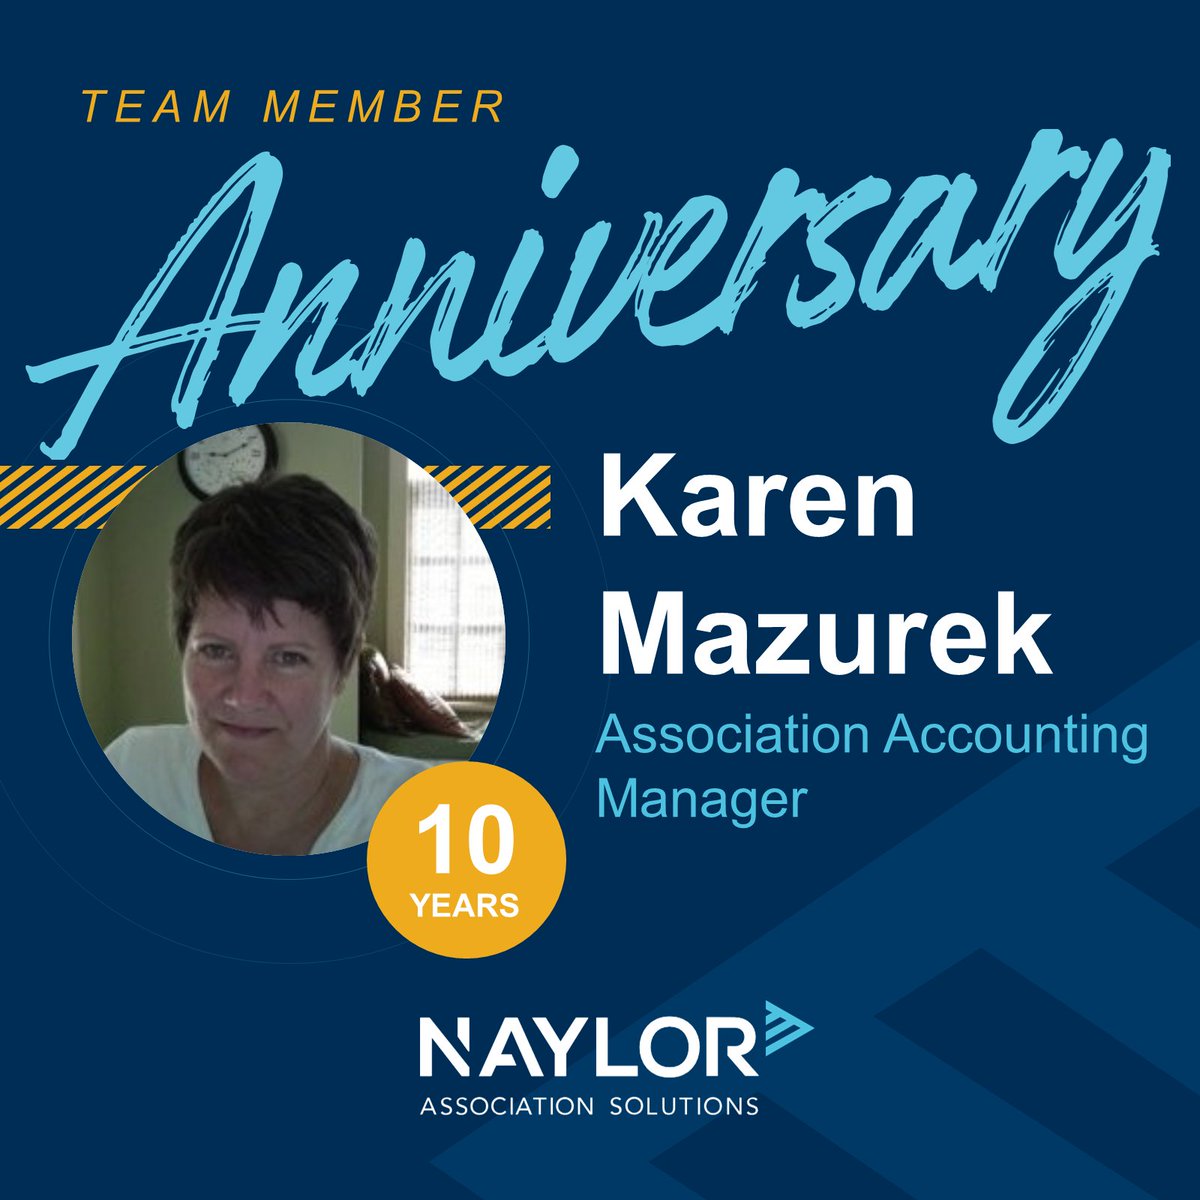 🎉Celebrating Team Member Milestones! 🎉 Today marks a milestone as we celebrate Karen Mazurek, Association Accounting Manager, 10-year anniversary at Naylor Association Solutions! Please join us in extending our congratulations and gratitude to Karen on this decade milestone!